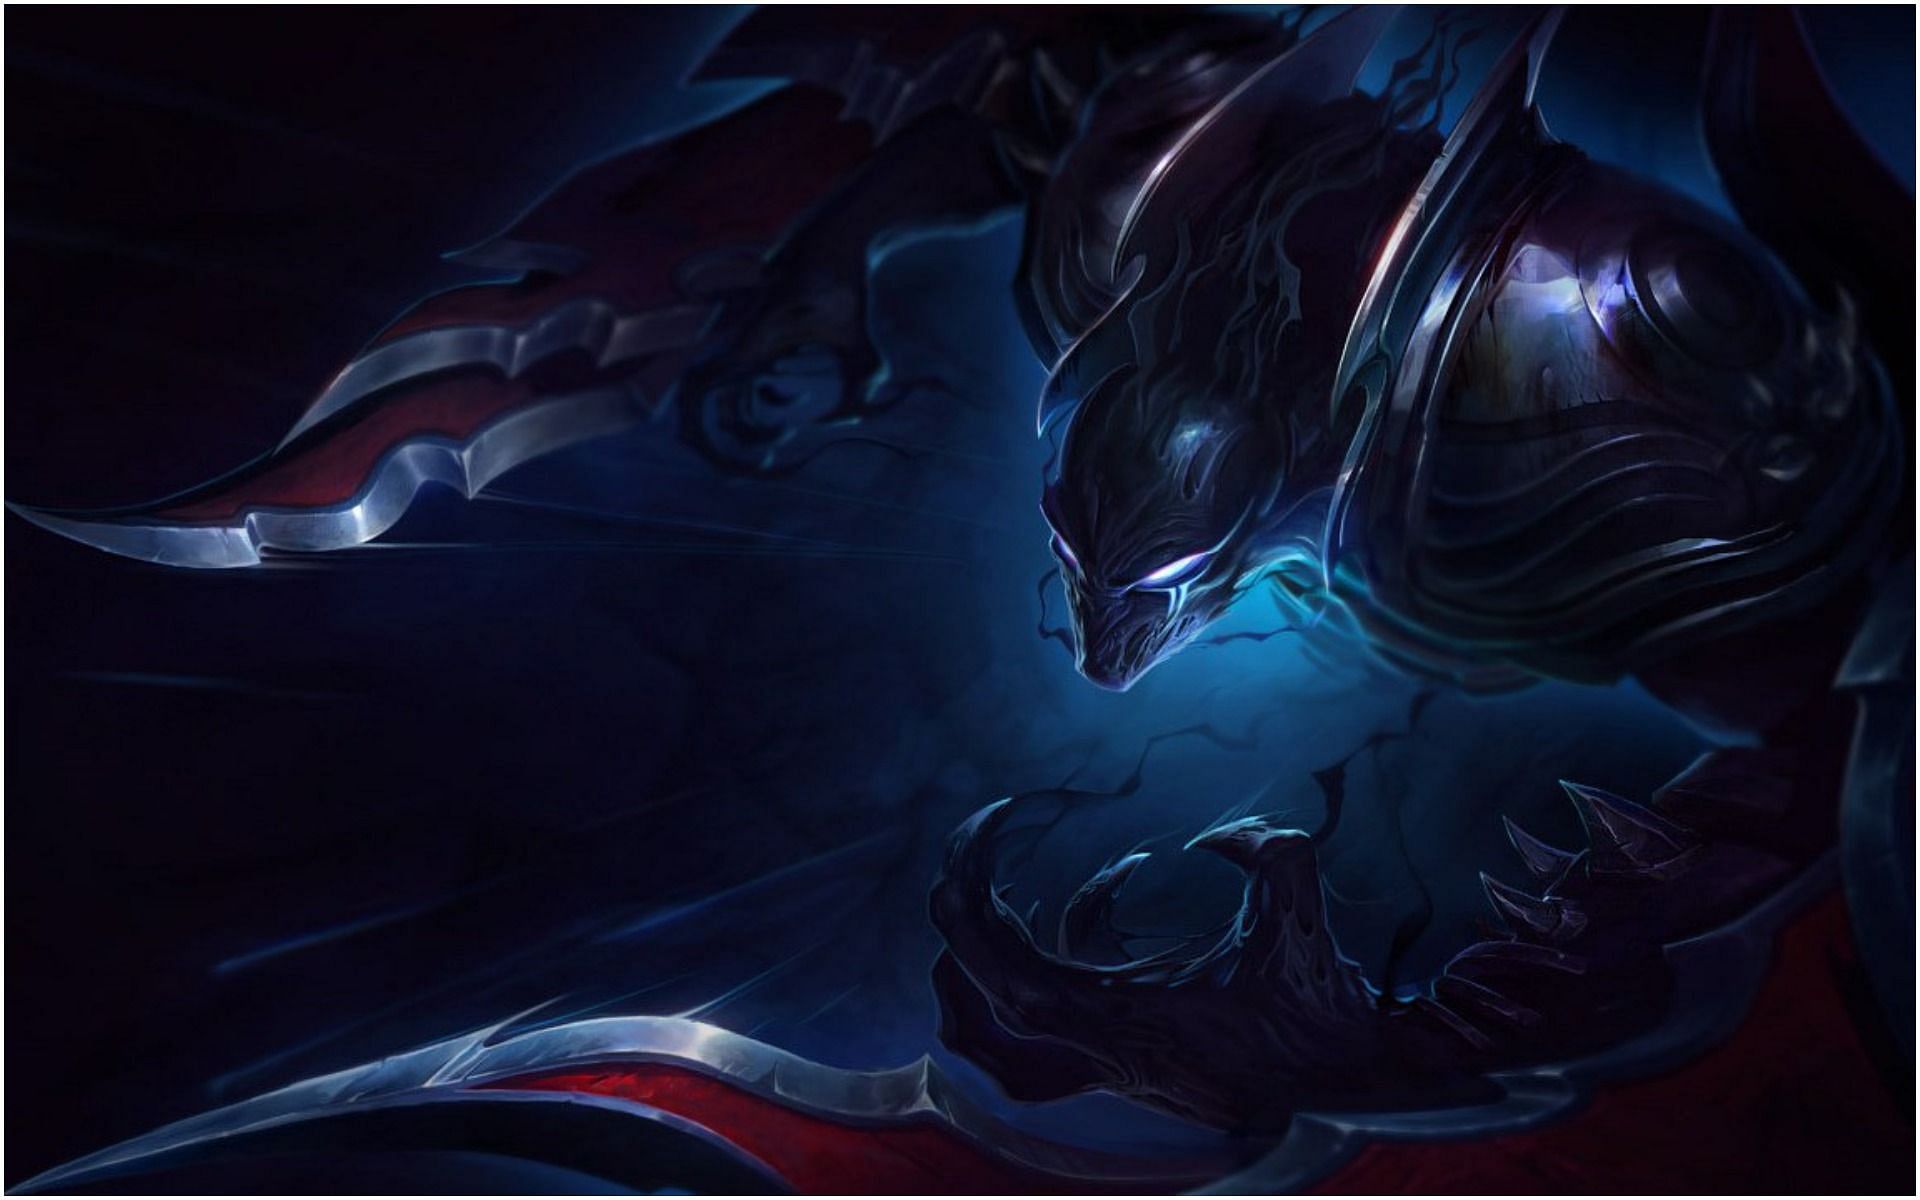 Nocturne in pre-season 2022 has emerged as one of the strongest picks due to the new item, Axiom Arc (Image via League of Legends)